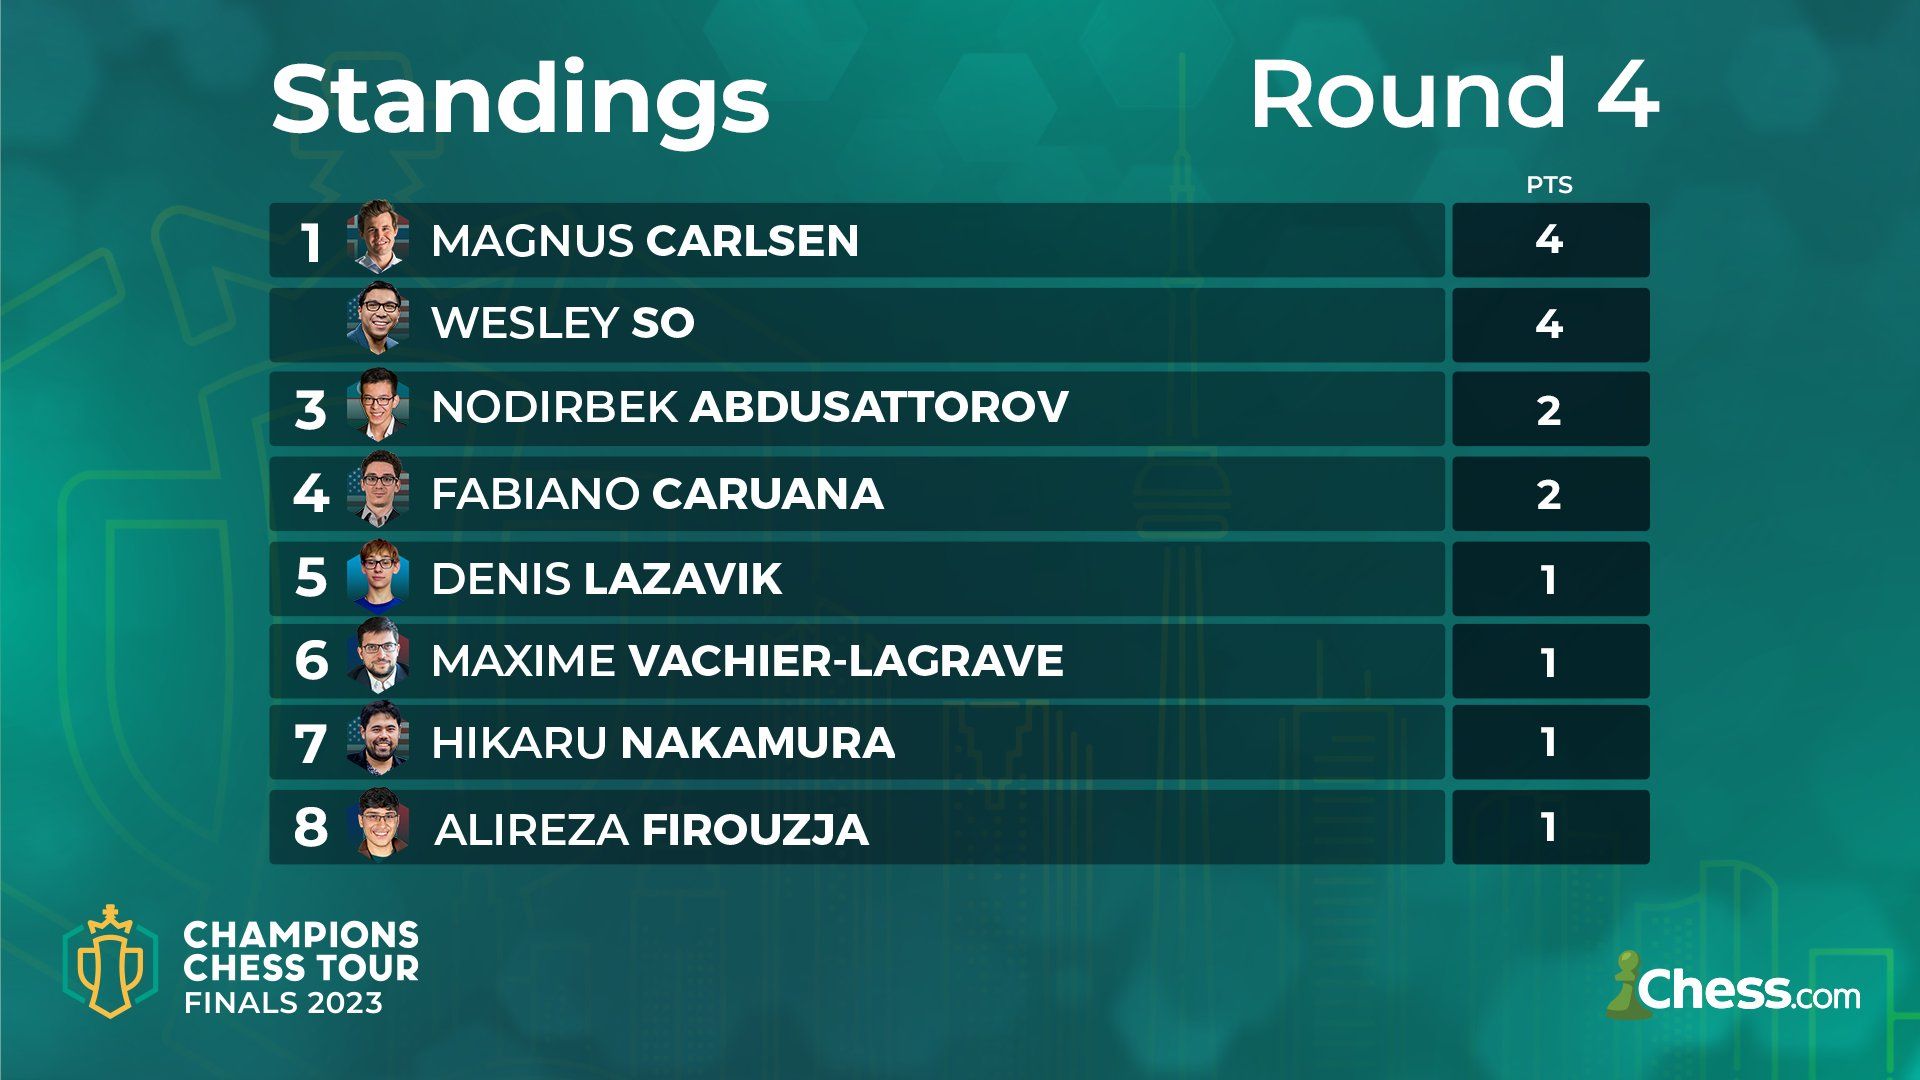 Champions Chess Tour Finals Day 3: So Defeats Carlsen; Nakamura On